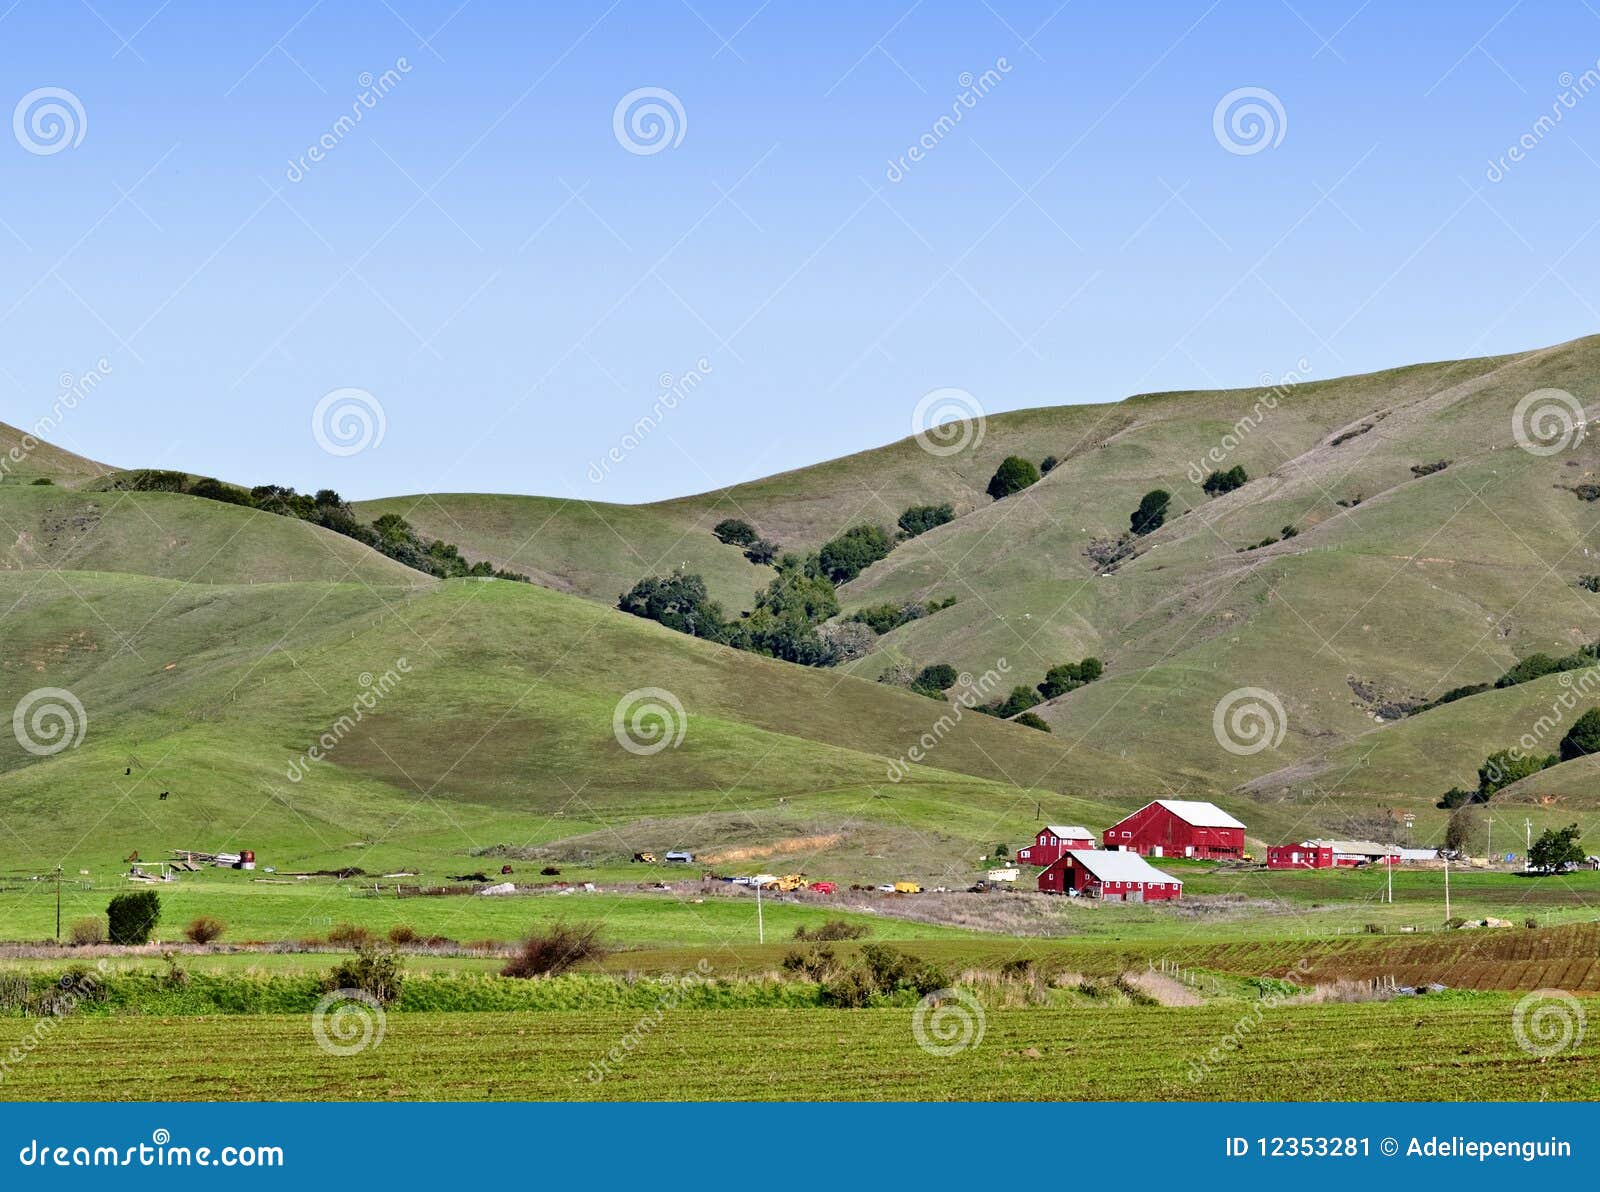 red barns, green rolling hills, california